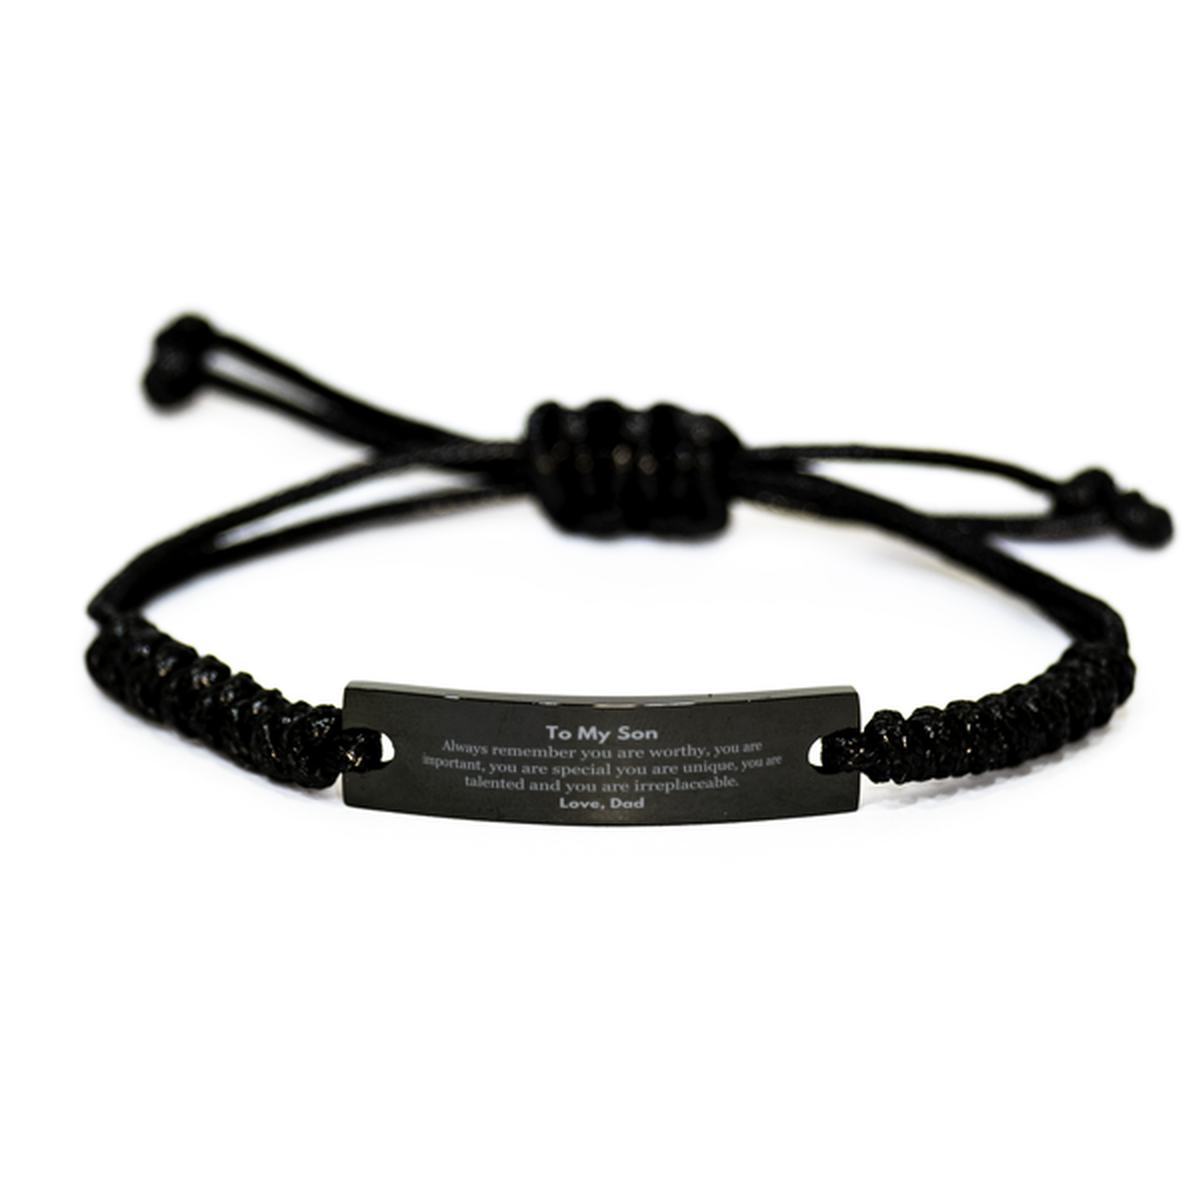 Son Birthday Gifts from Dad, Inspirational Black Rope Bracelet for Son Christmas Graduation Gifts for Son Always remember you are worthy, you are important. Love, Dad